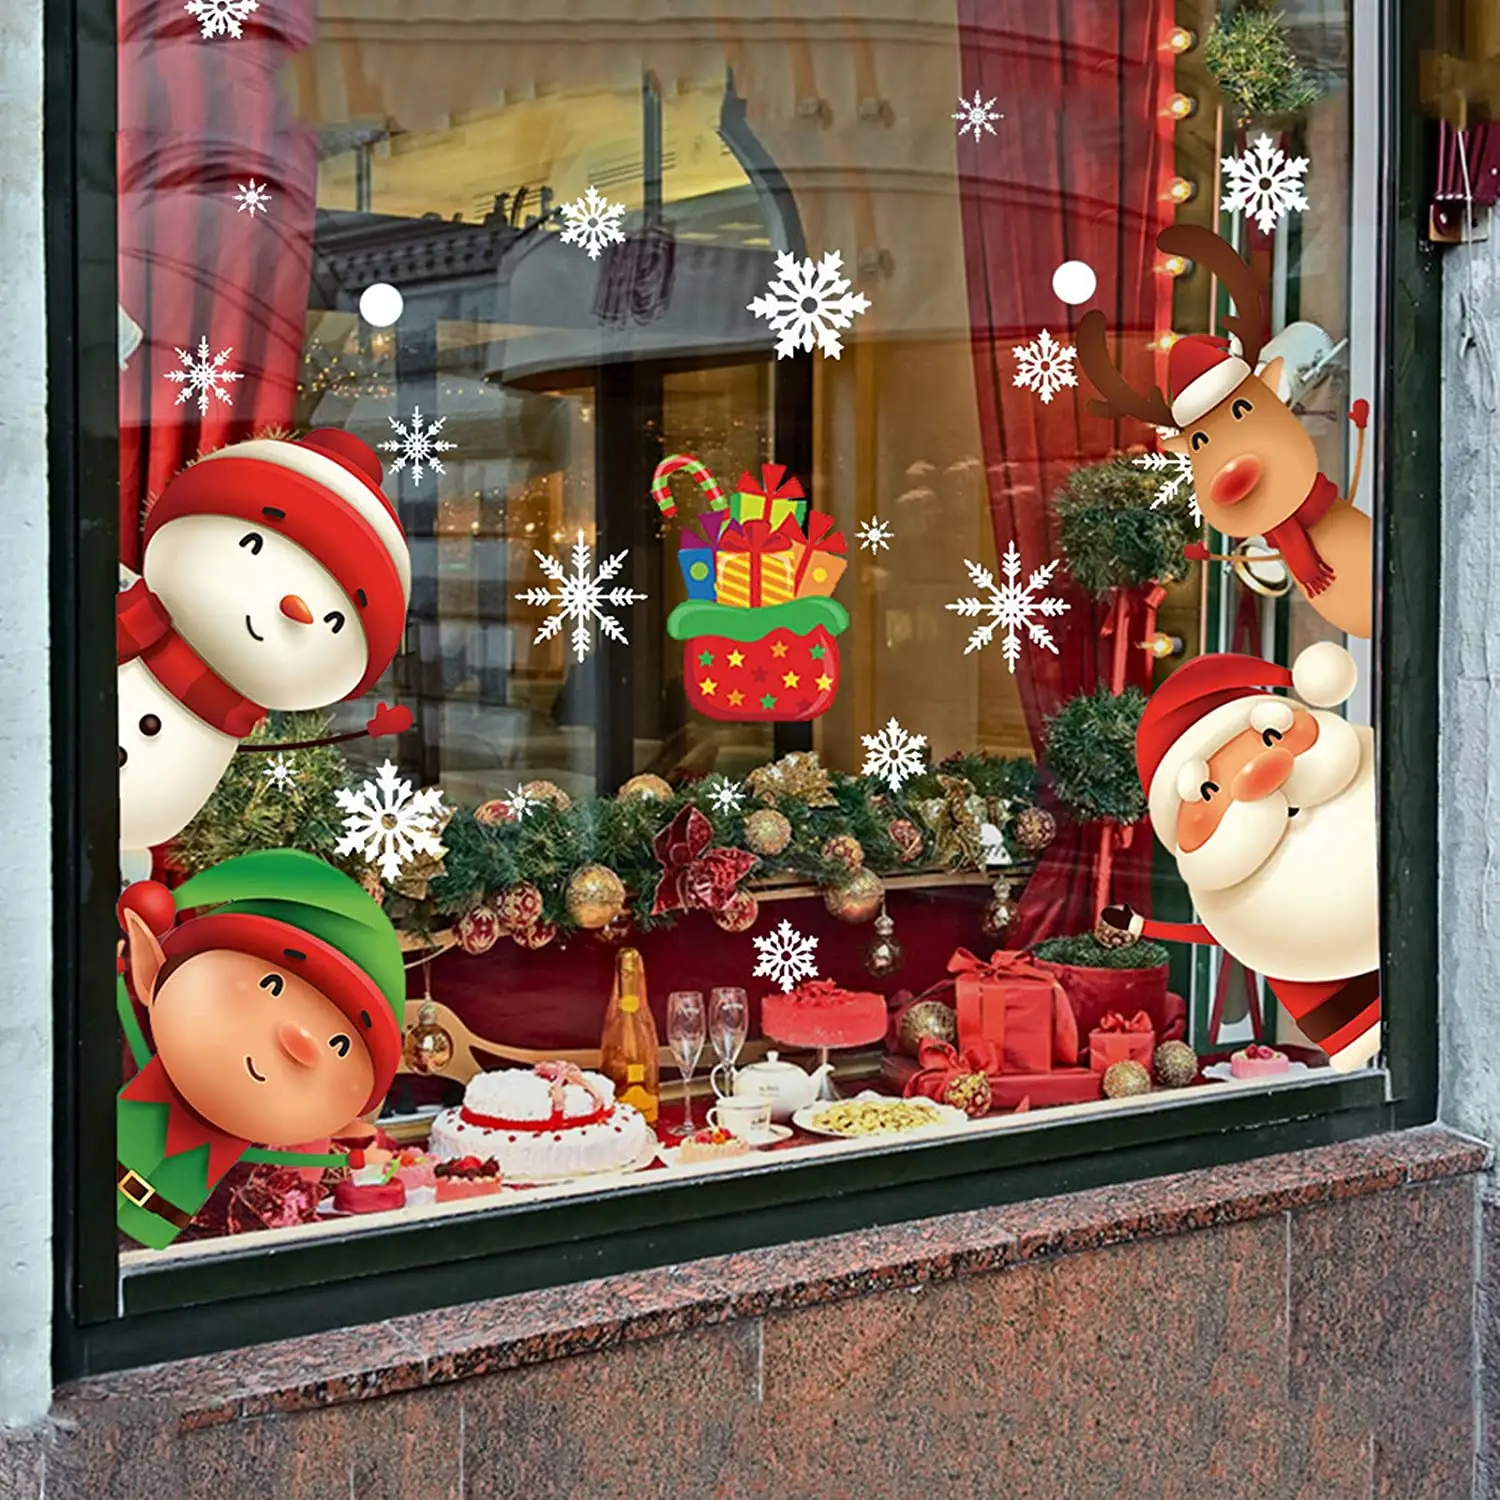 Christmas Windows Clings, Christmas Window Sticker Decals Xmas Santa Window Clings Stickers for Glass Windows Decorations